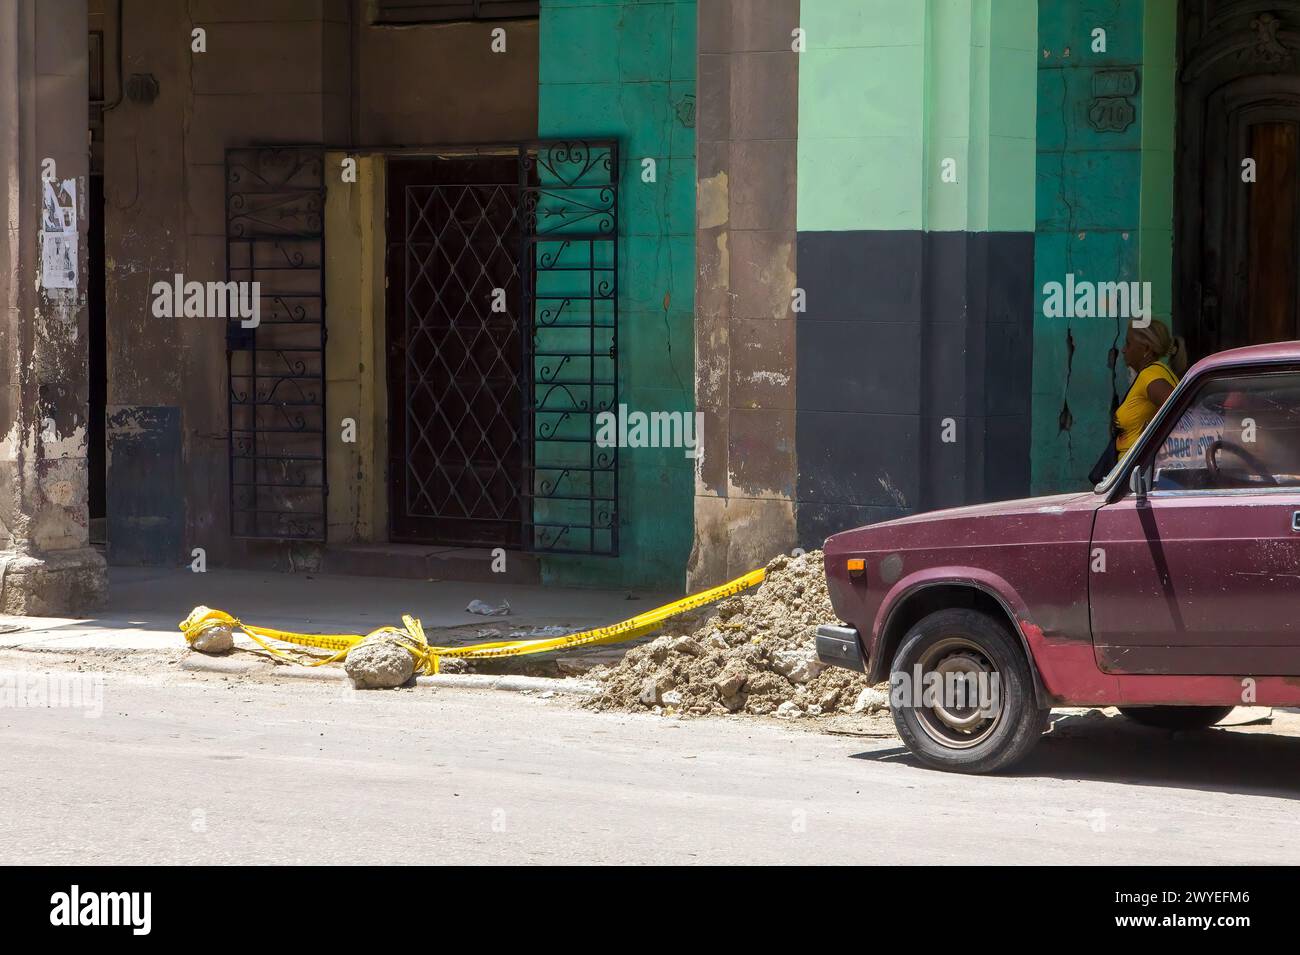 An old Lada car parked by a pile of rubble on a city street in Havana, Cuba Stock Photo